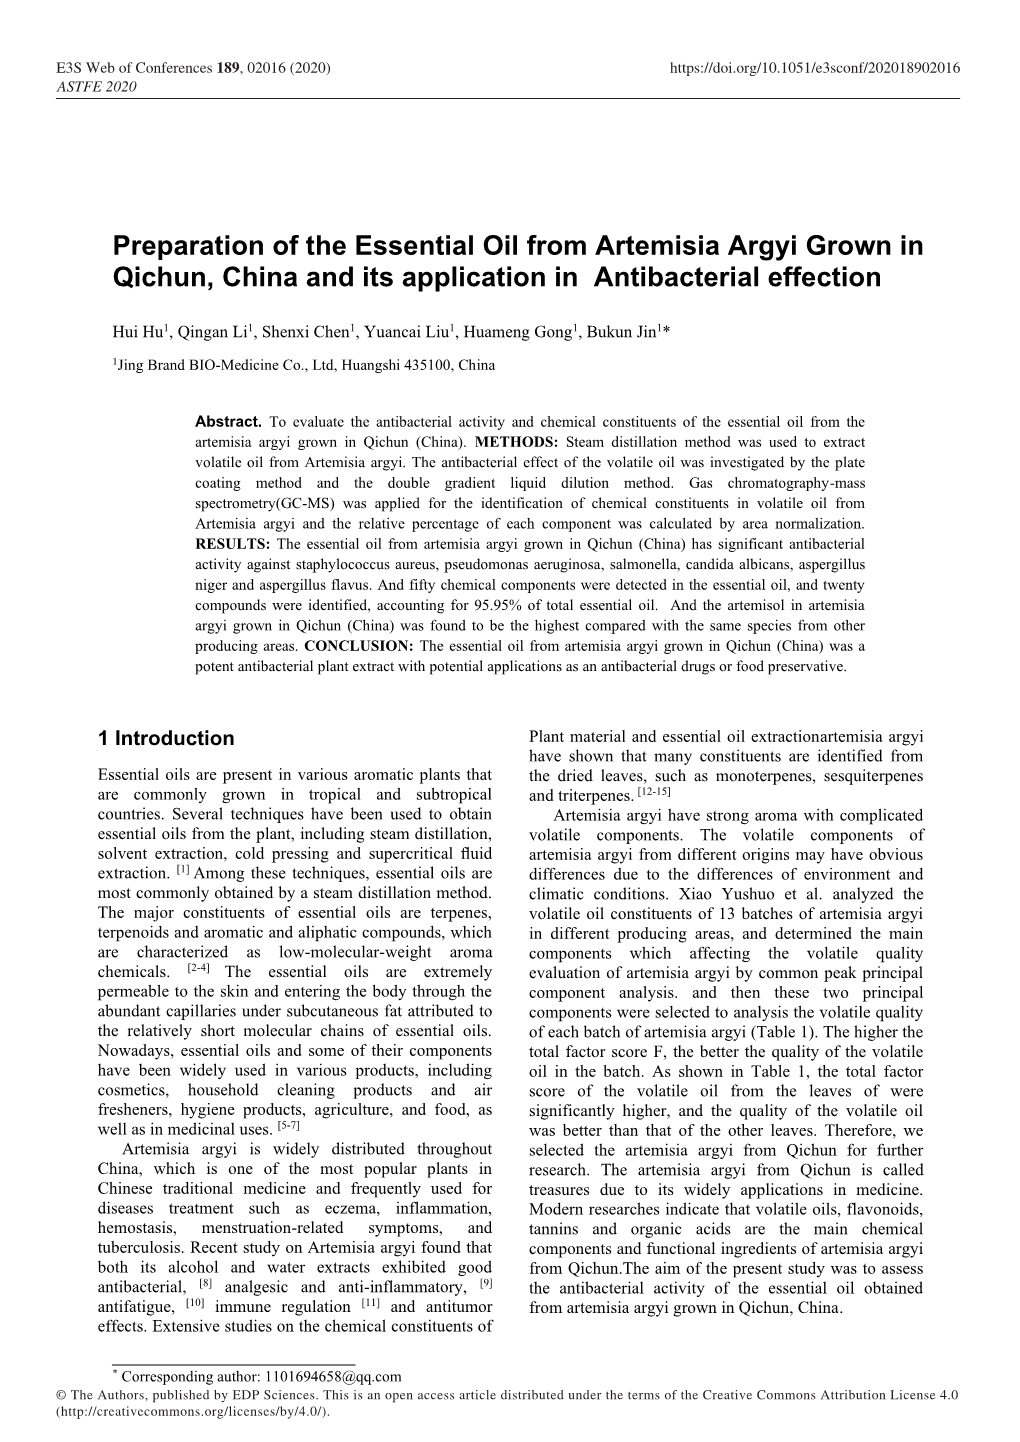 Preparation of the Essential Oil from Artemisia Argyi Grown in Qichun, China and Its Application in Antibacterial Effection